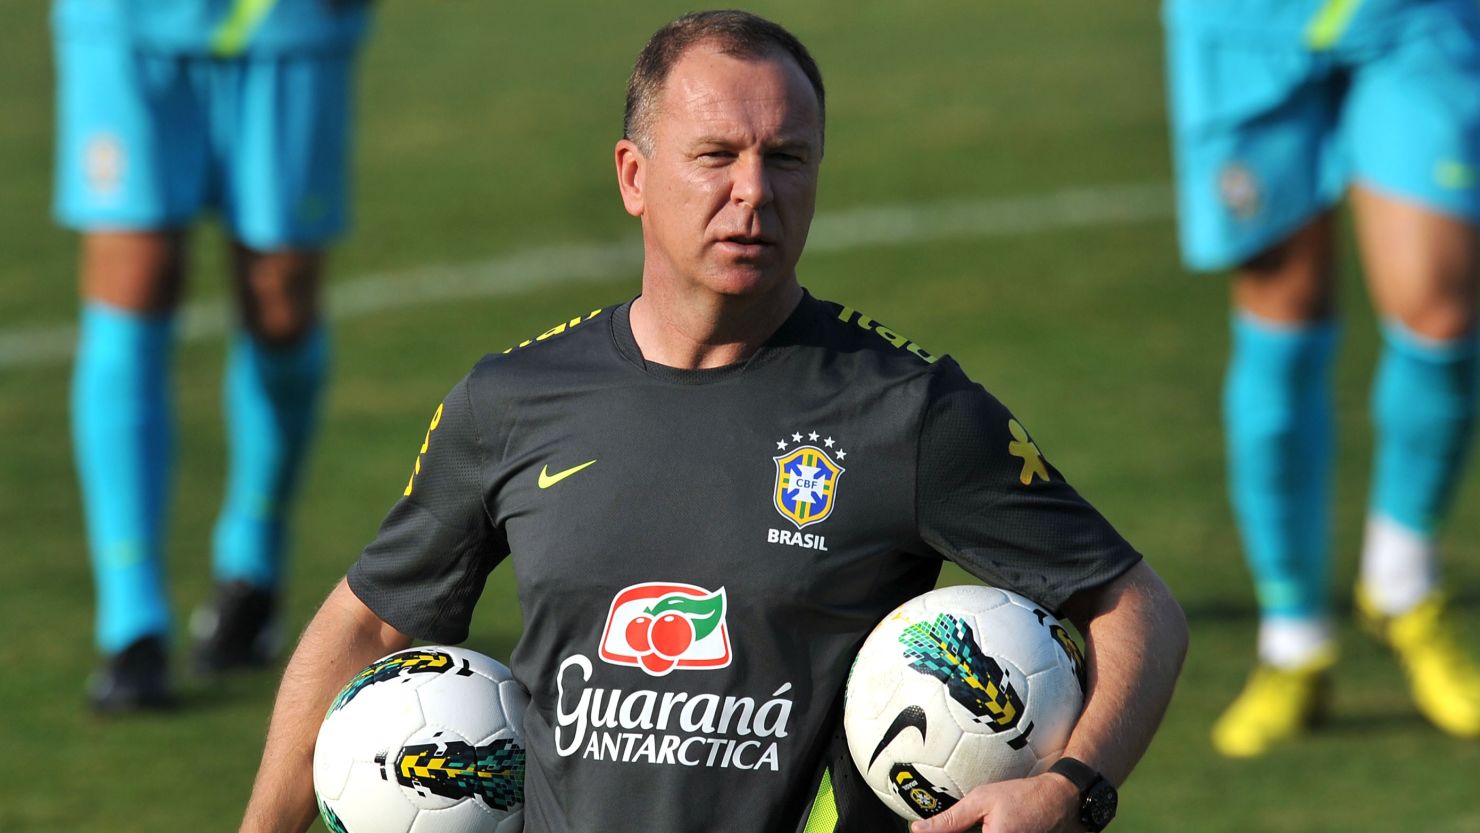 Mano Menezes has been relieved of his duties by the Brazilian Football Association ahead of the 2014 World Cup.